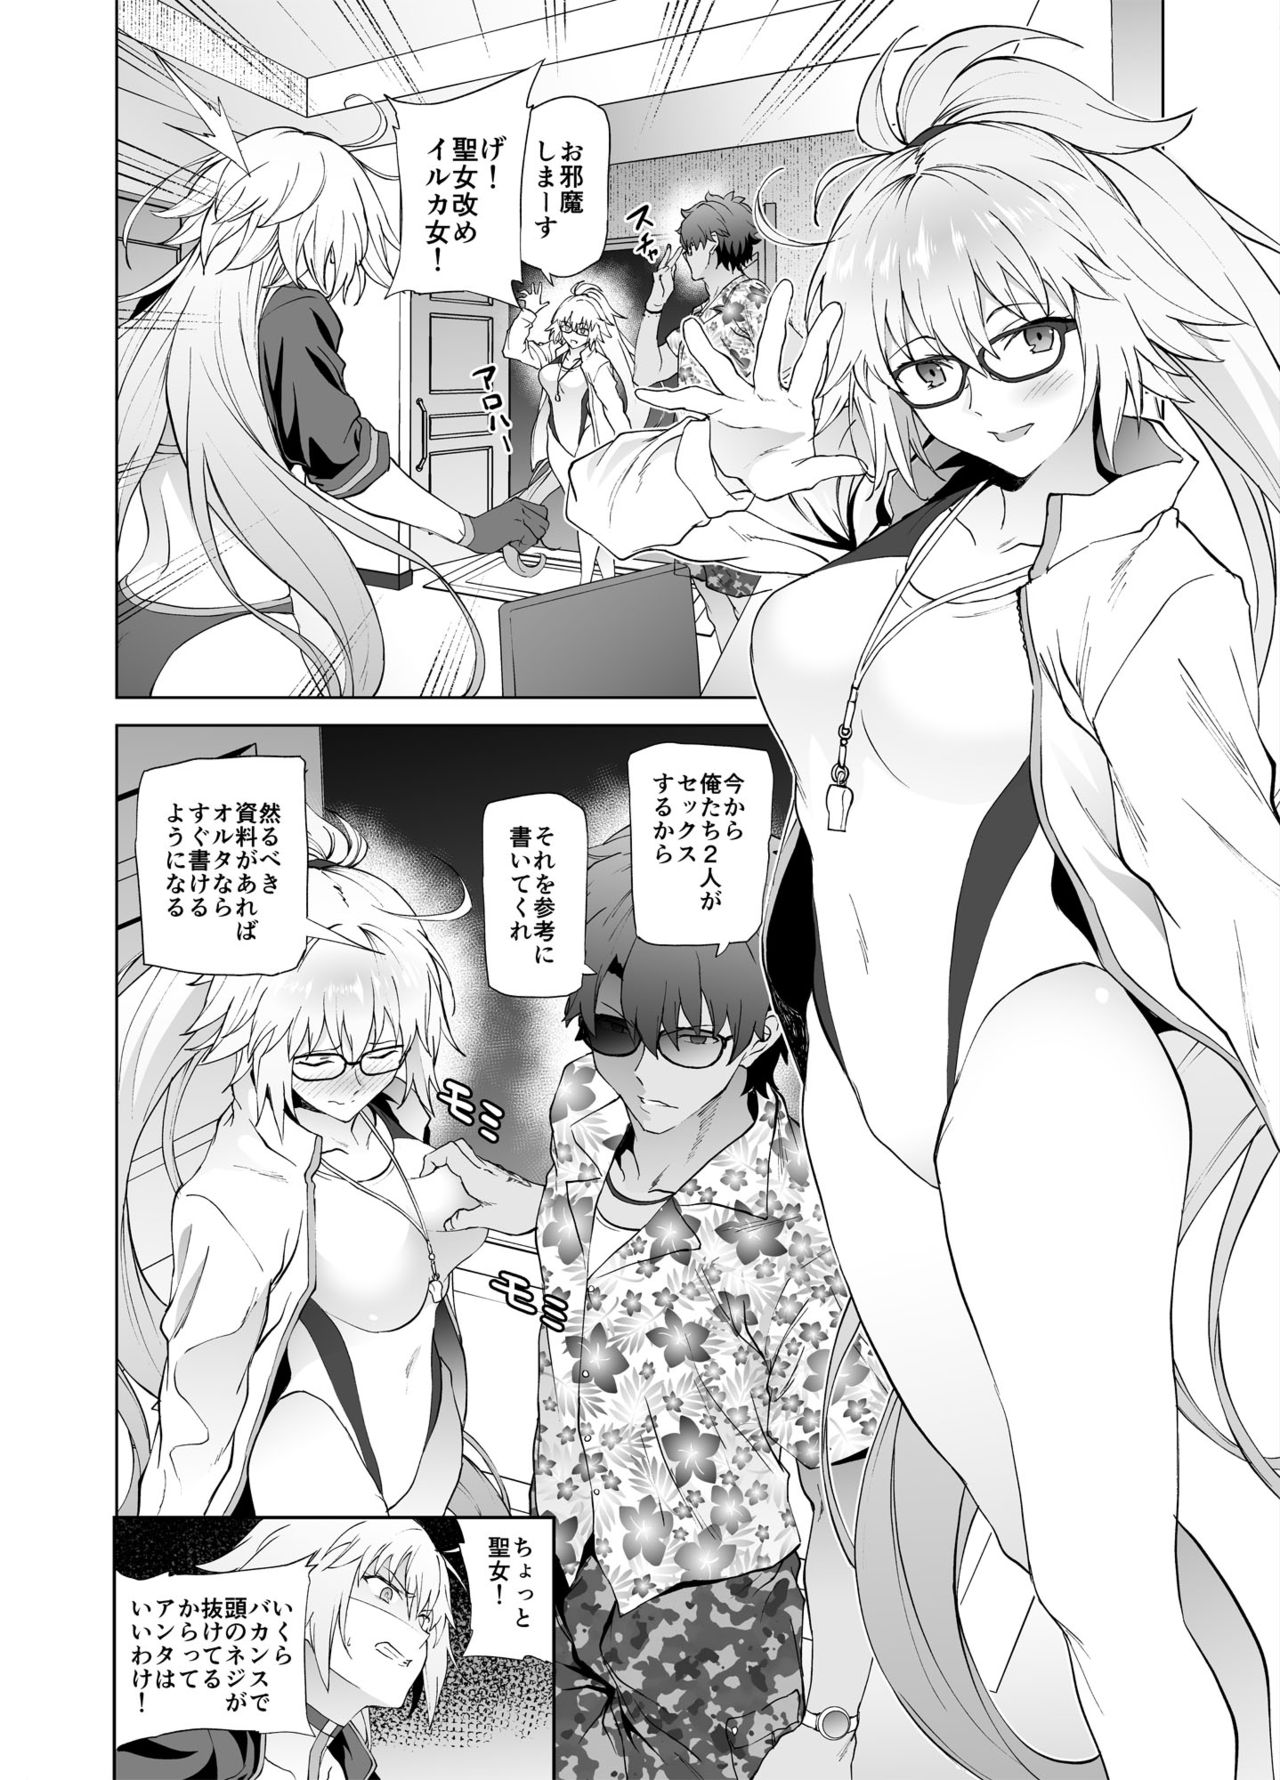 [EXTENDED PART (Endo Yoshiki)] Jeanne W (Fate/Grand Order) [Digital] page 7 full